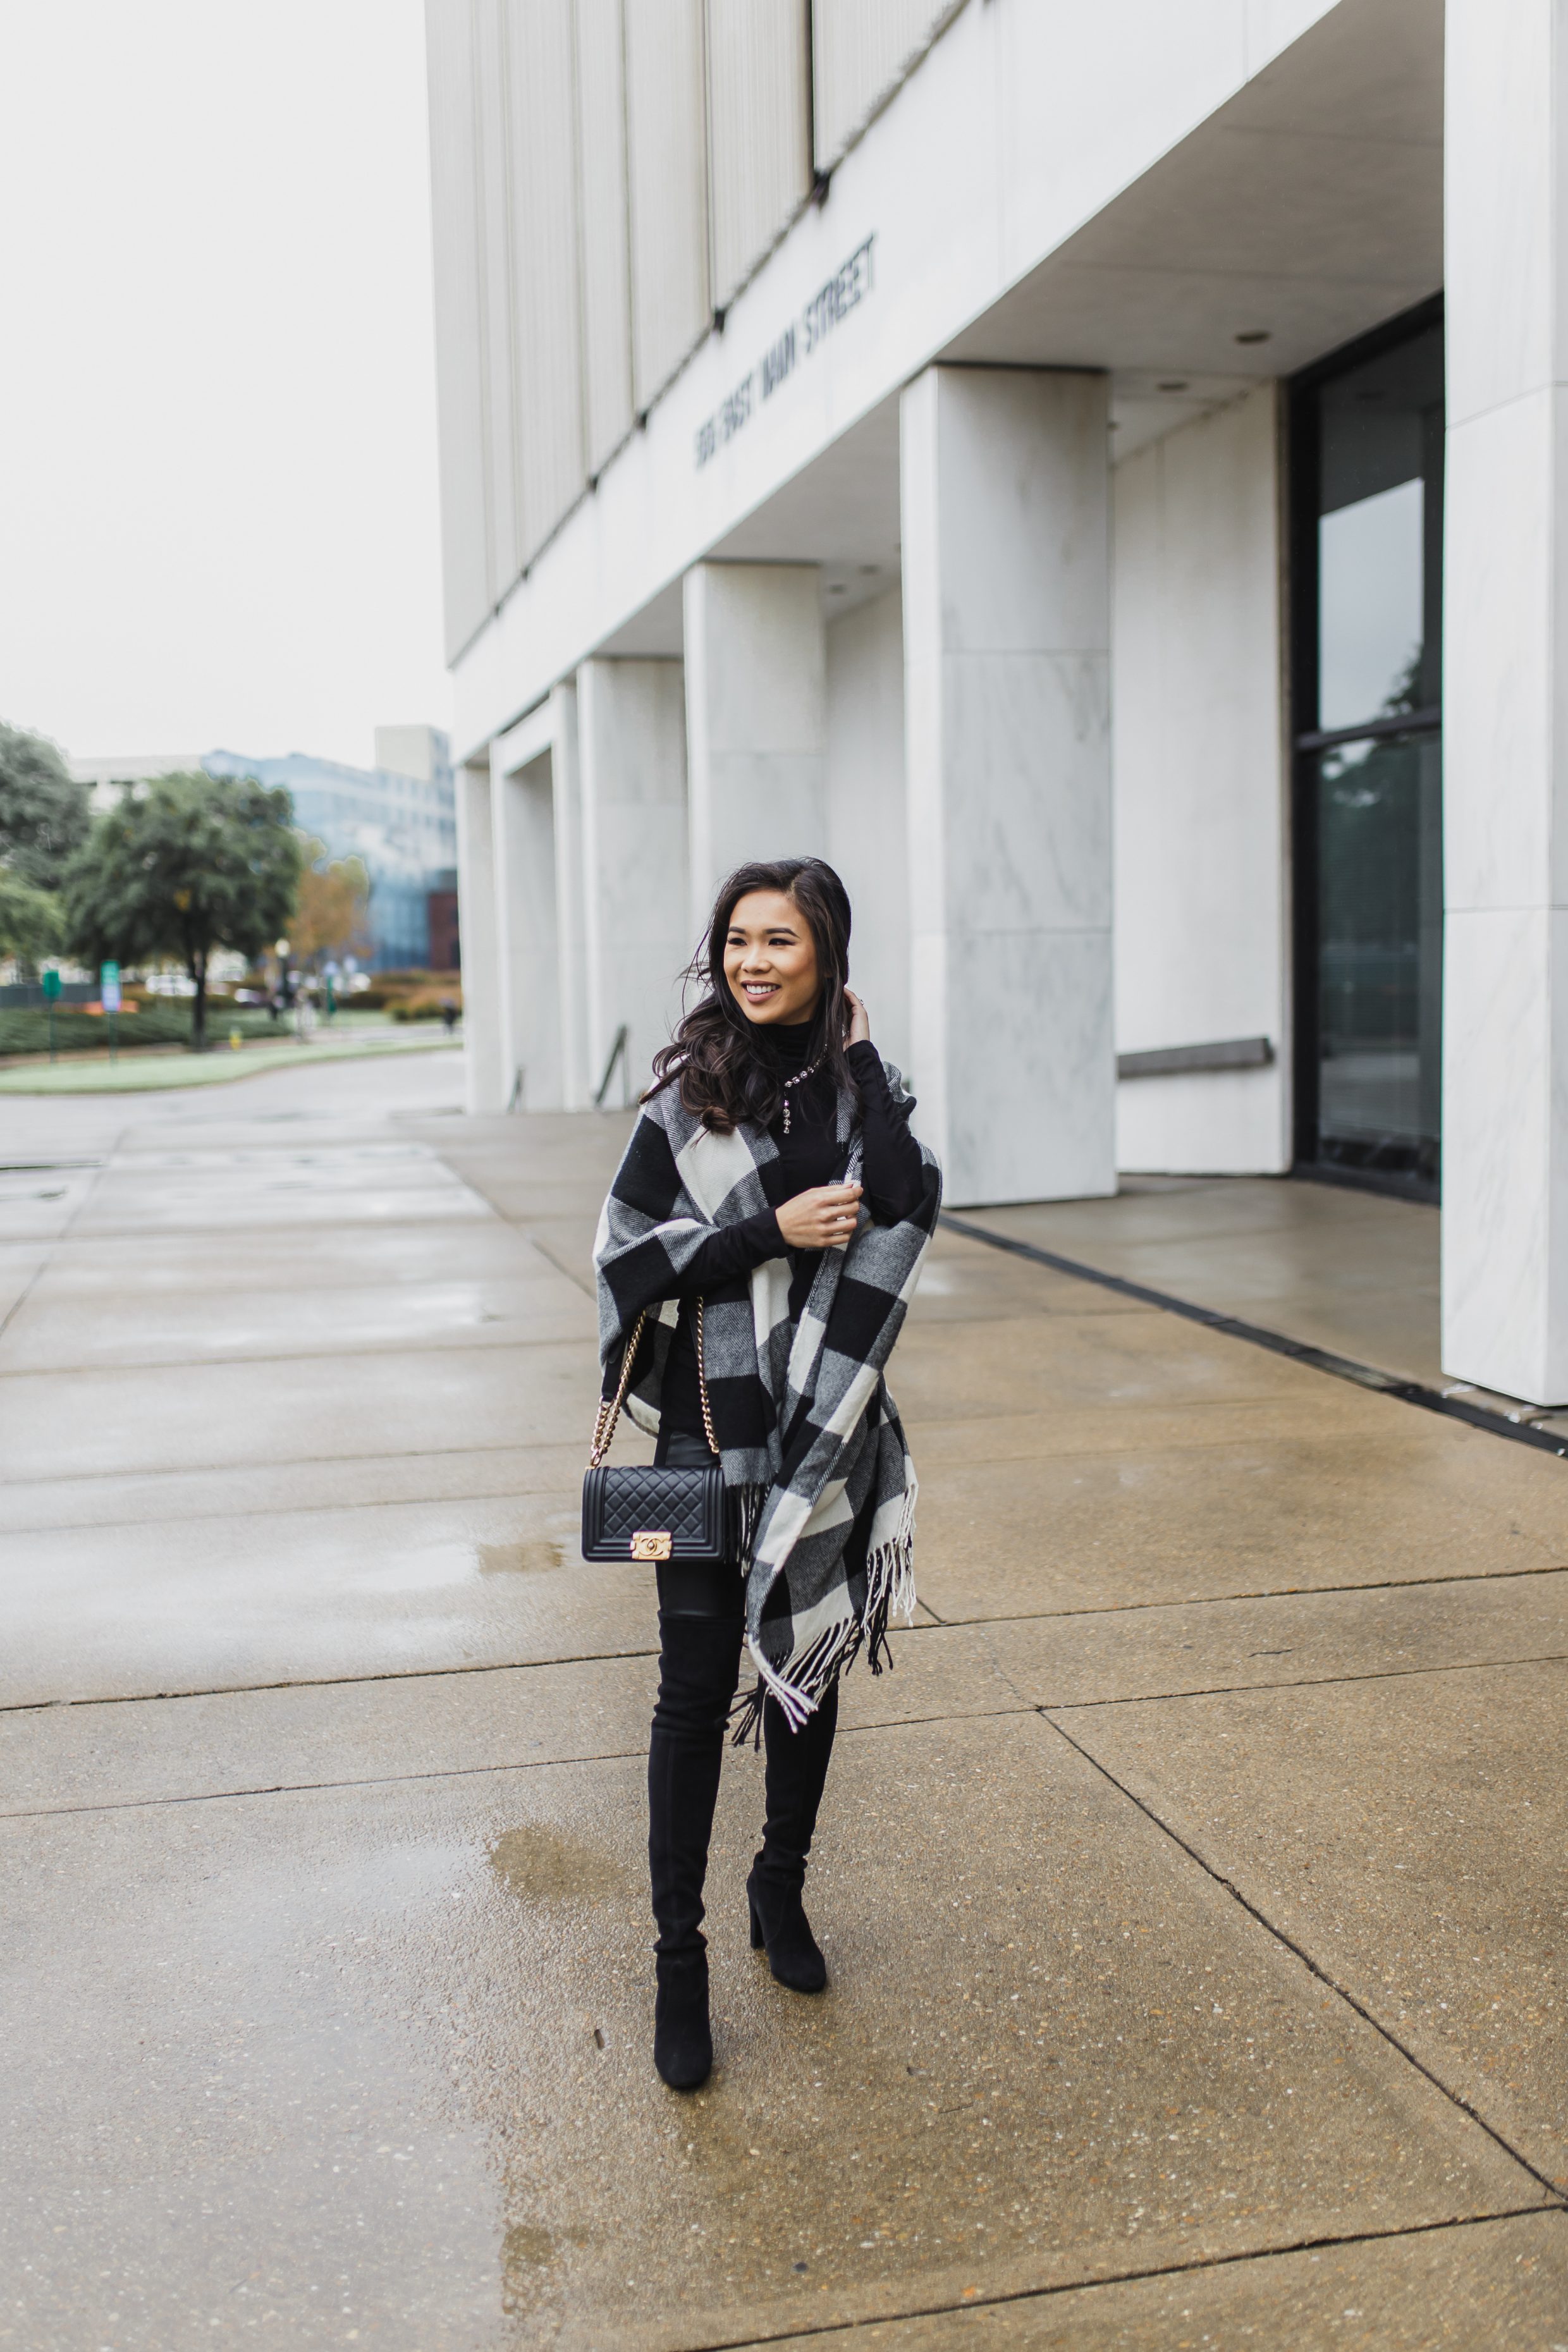 Buffalo check poncho with over the knee boots